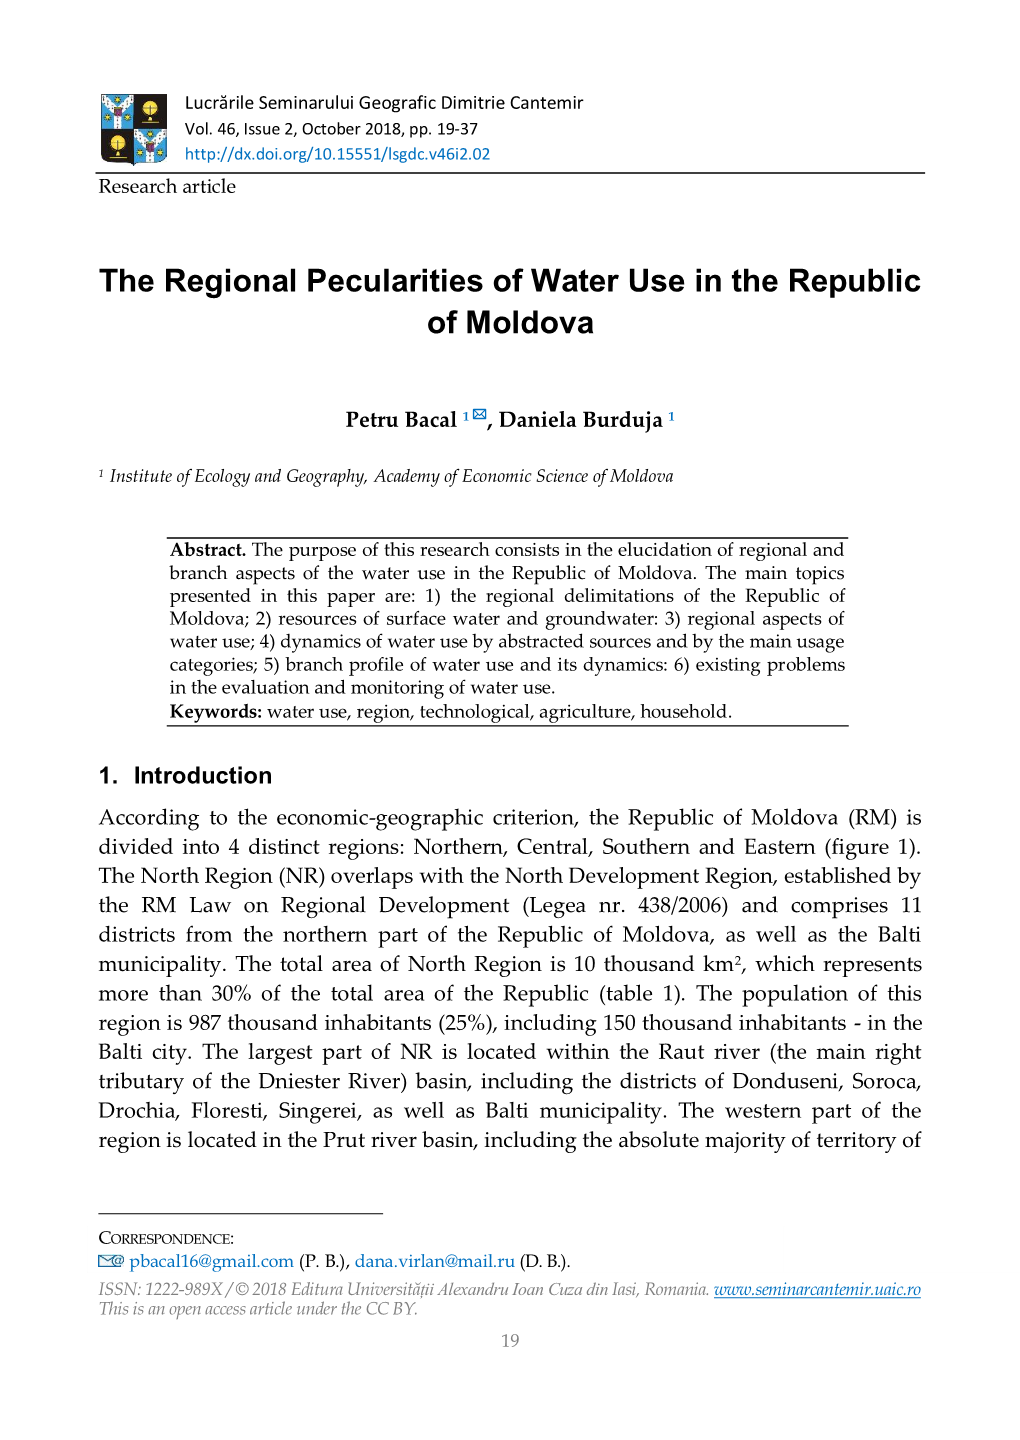 The Regional Pecularities of Water Use in the Republic of Moldova